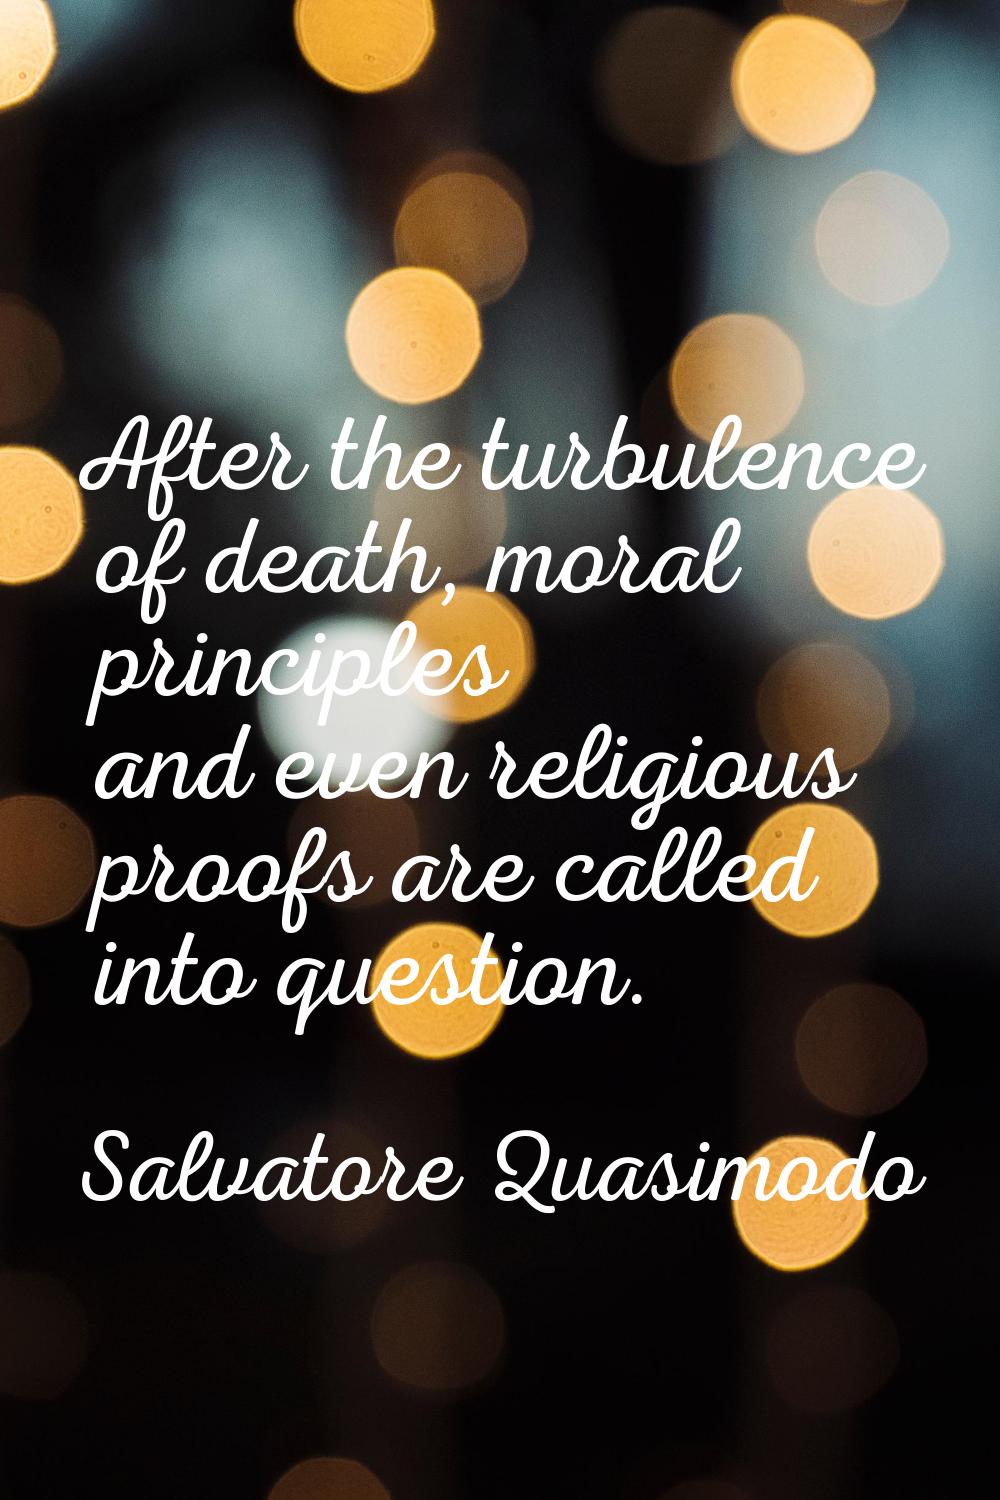 After the turbulence of death, moral principles and even religious proofs are called into question.